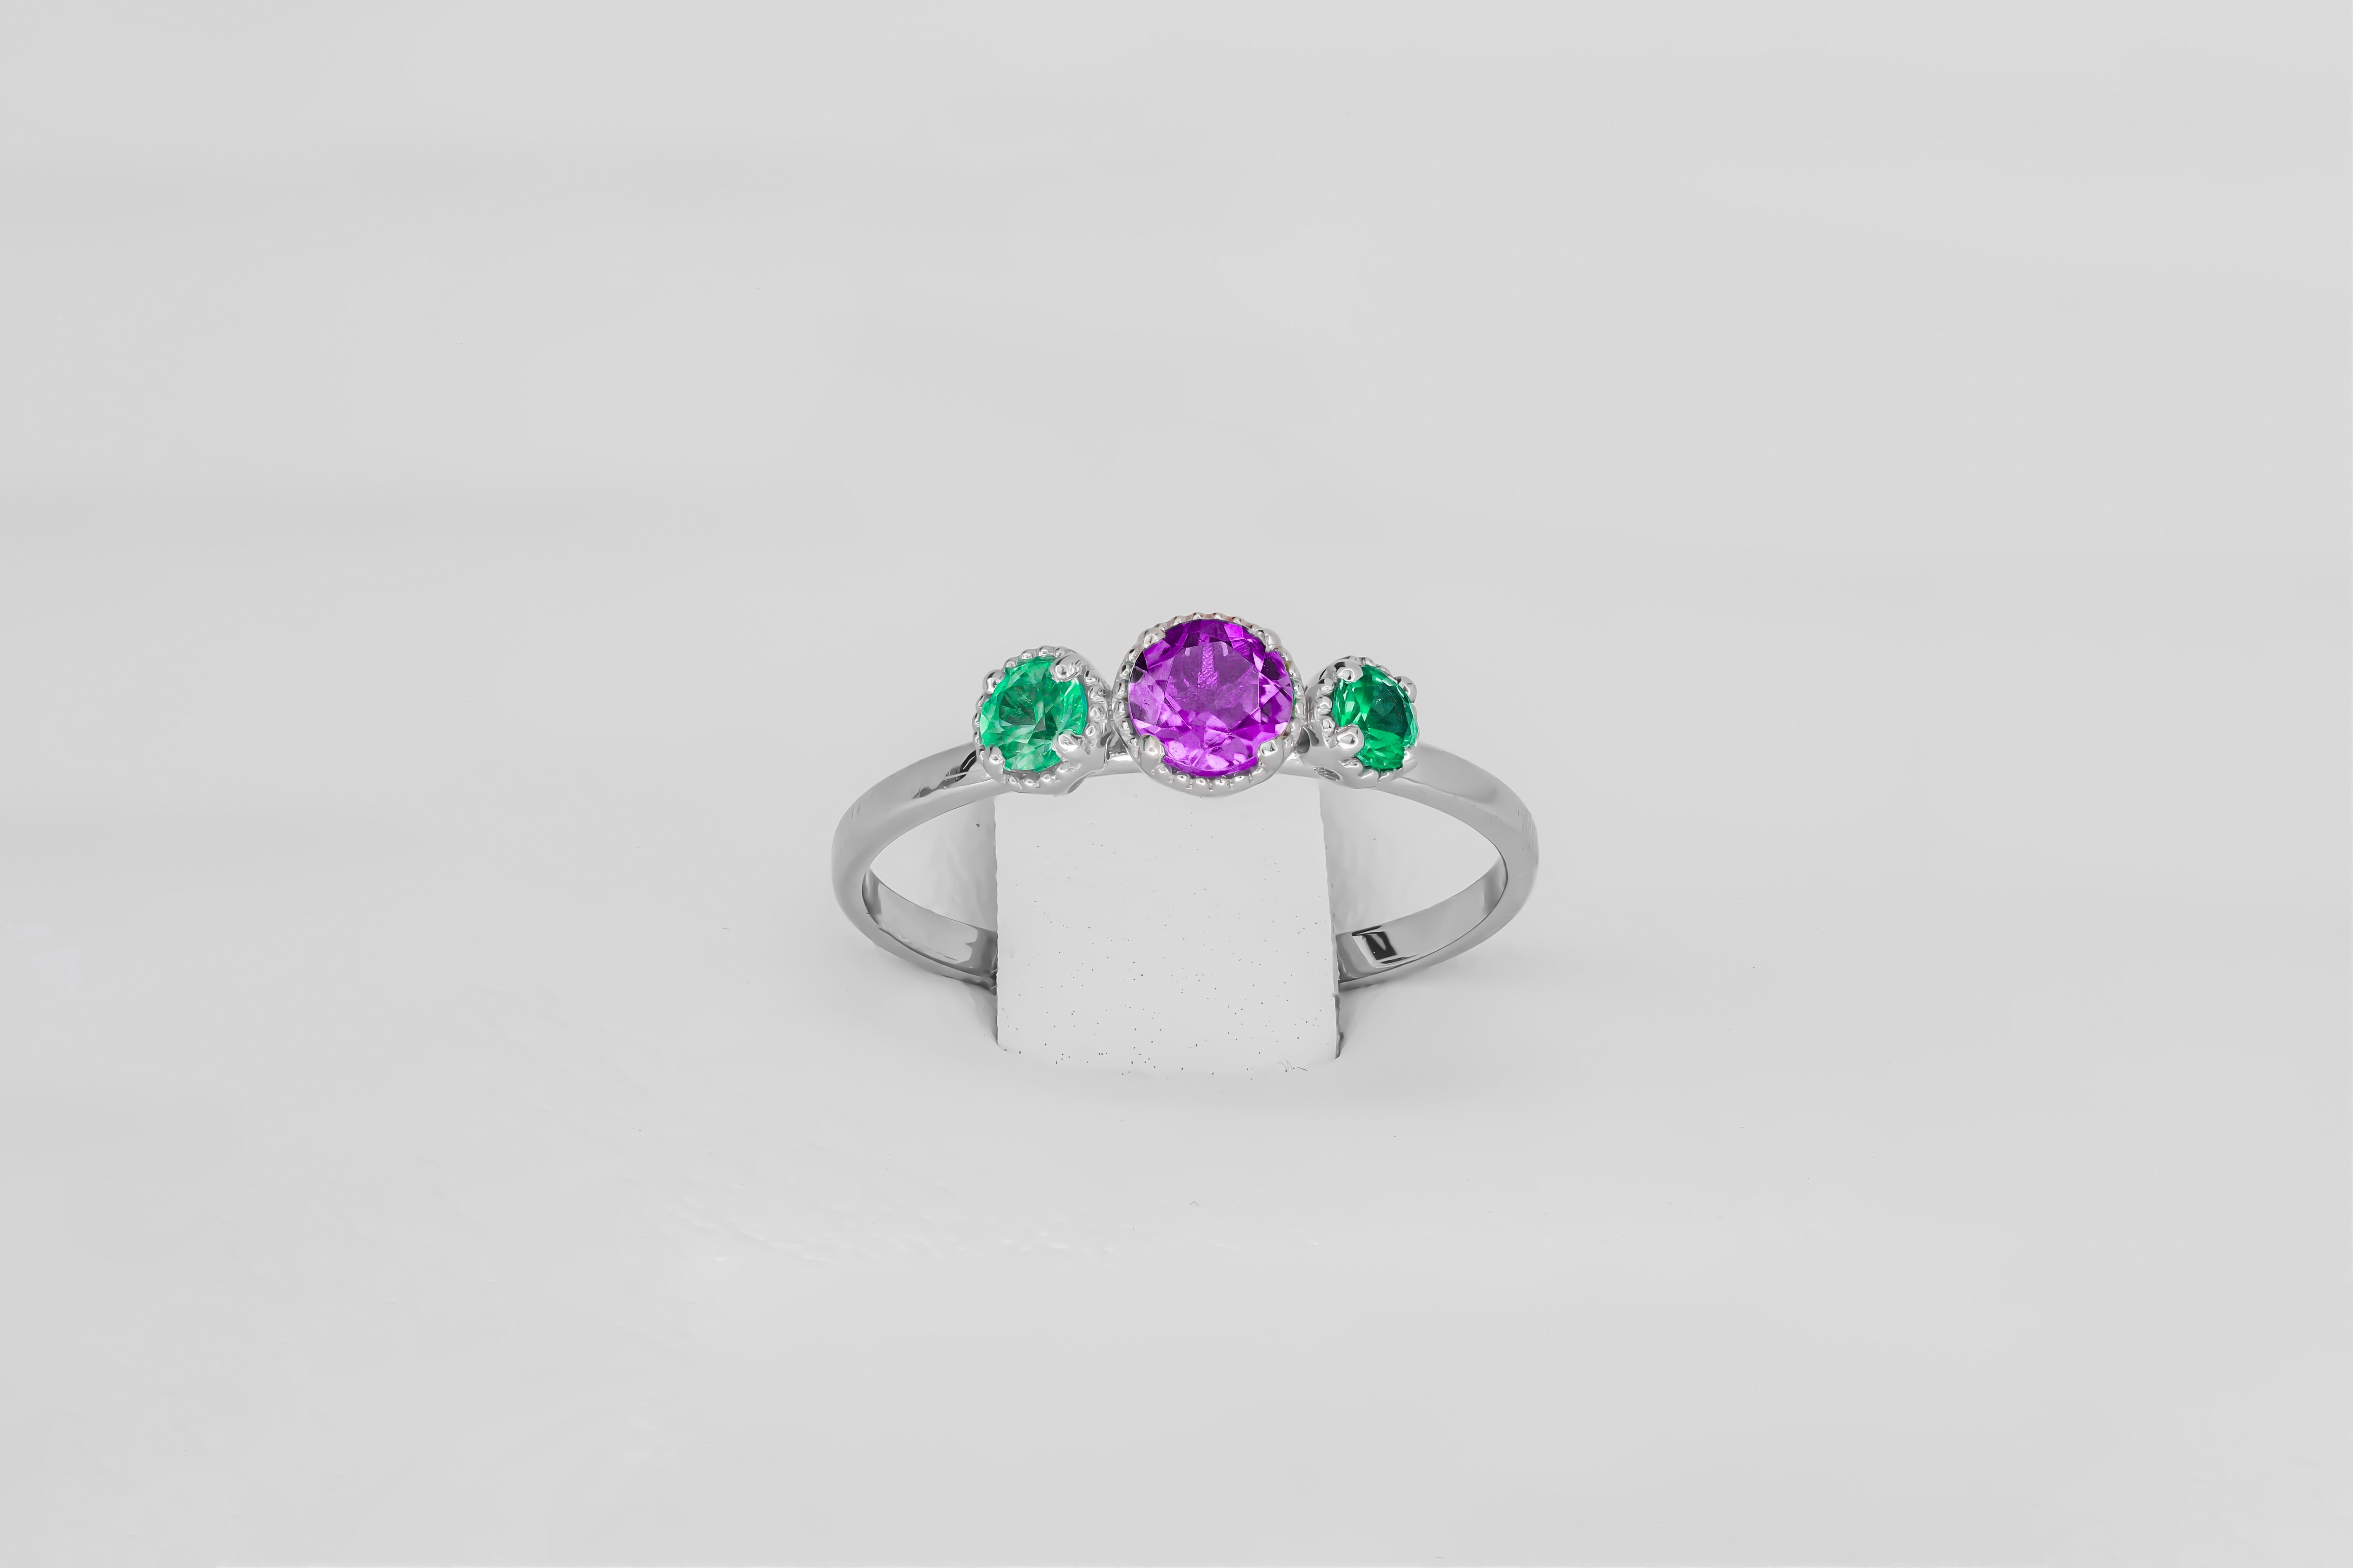 For Sale:  Green and purple gem 14k gold ring. 5